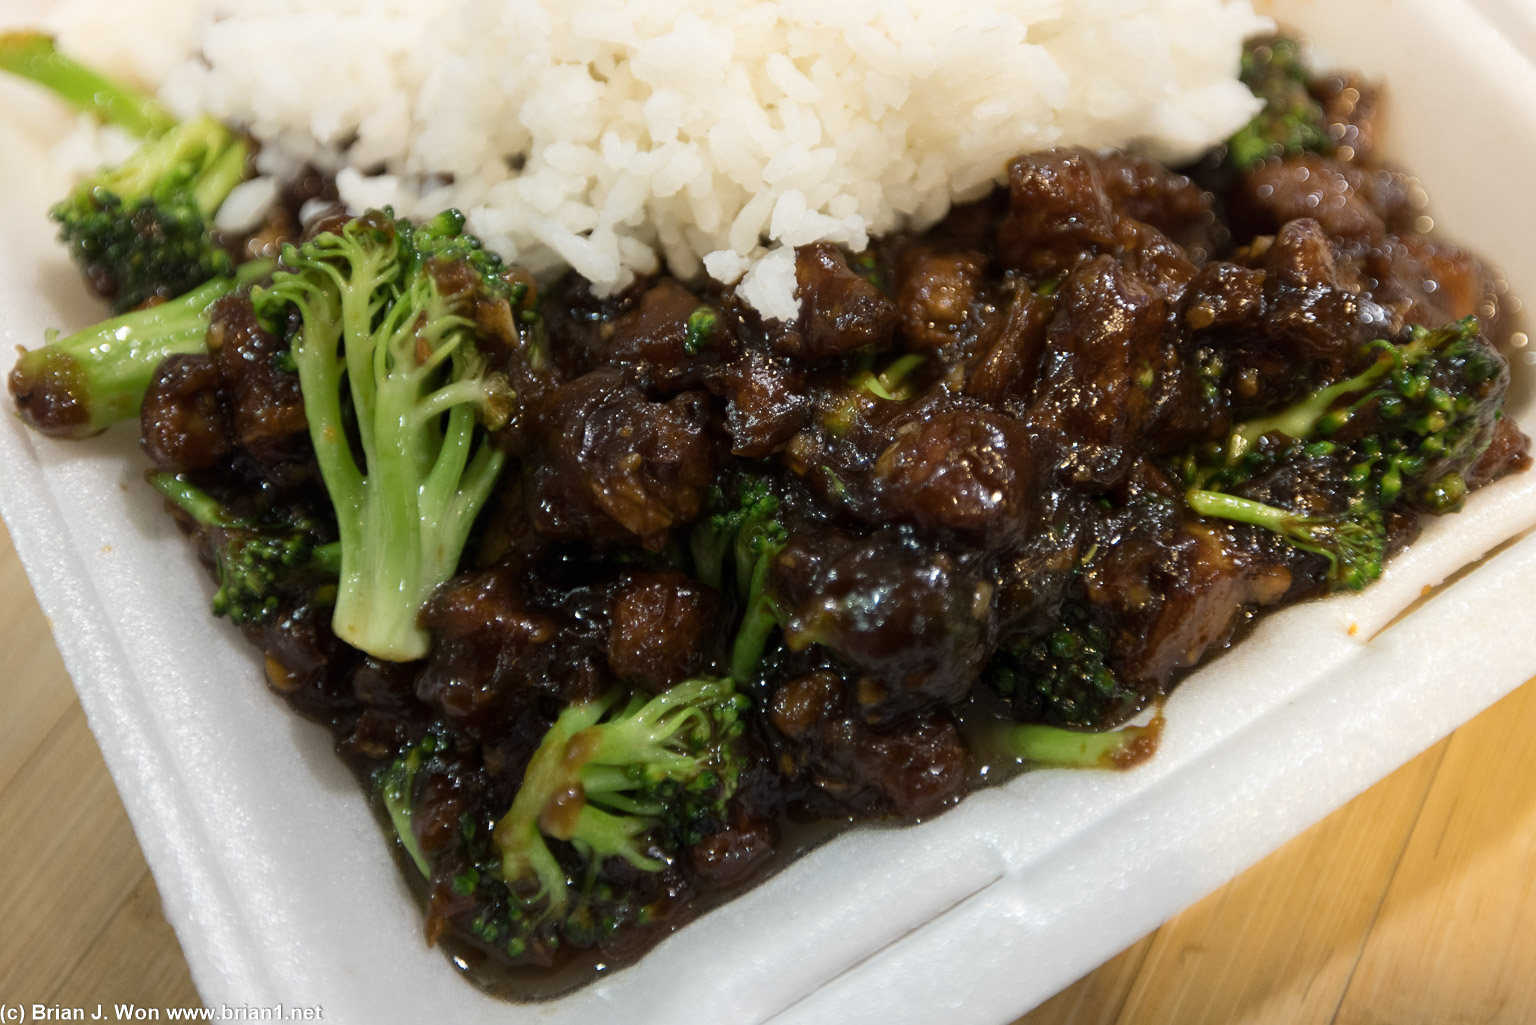 Broccoli beef at City Wok, Concourse B, is disgusting. Panda Express is 100x better.